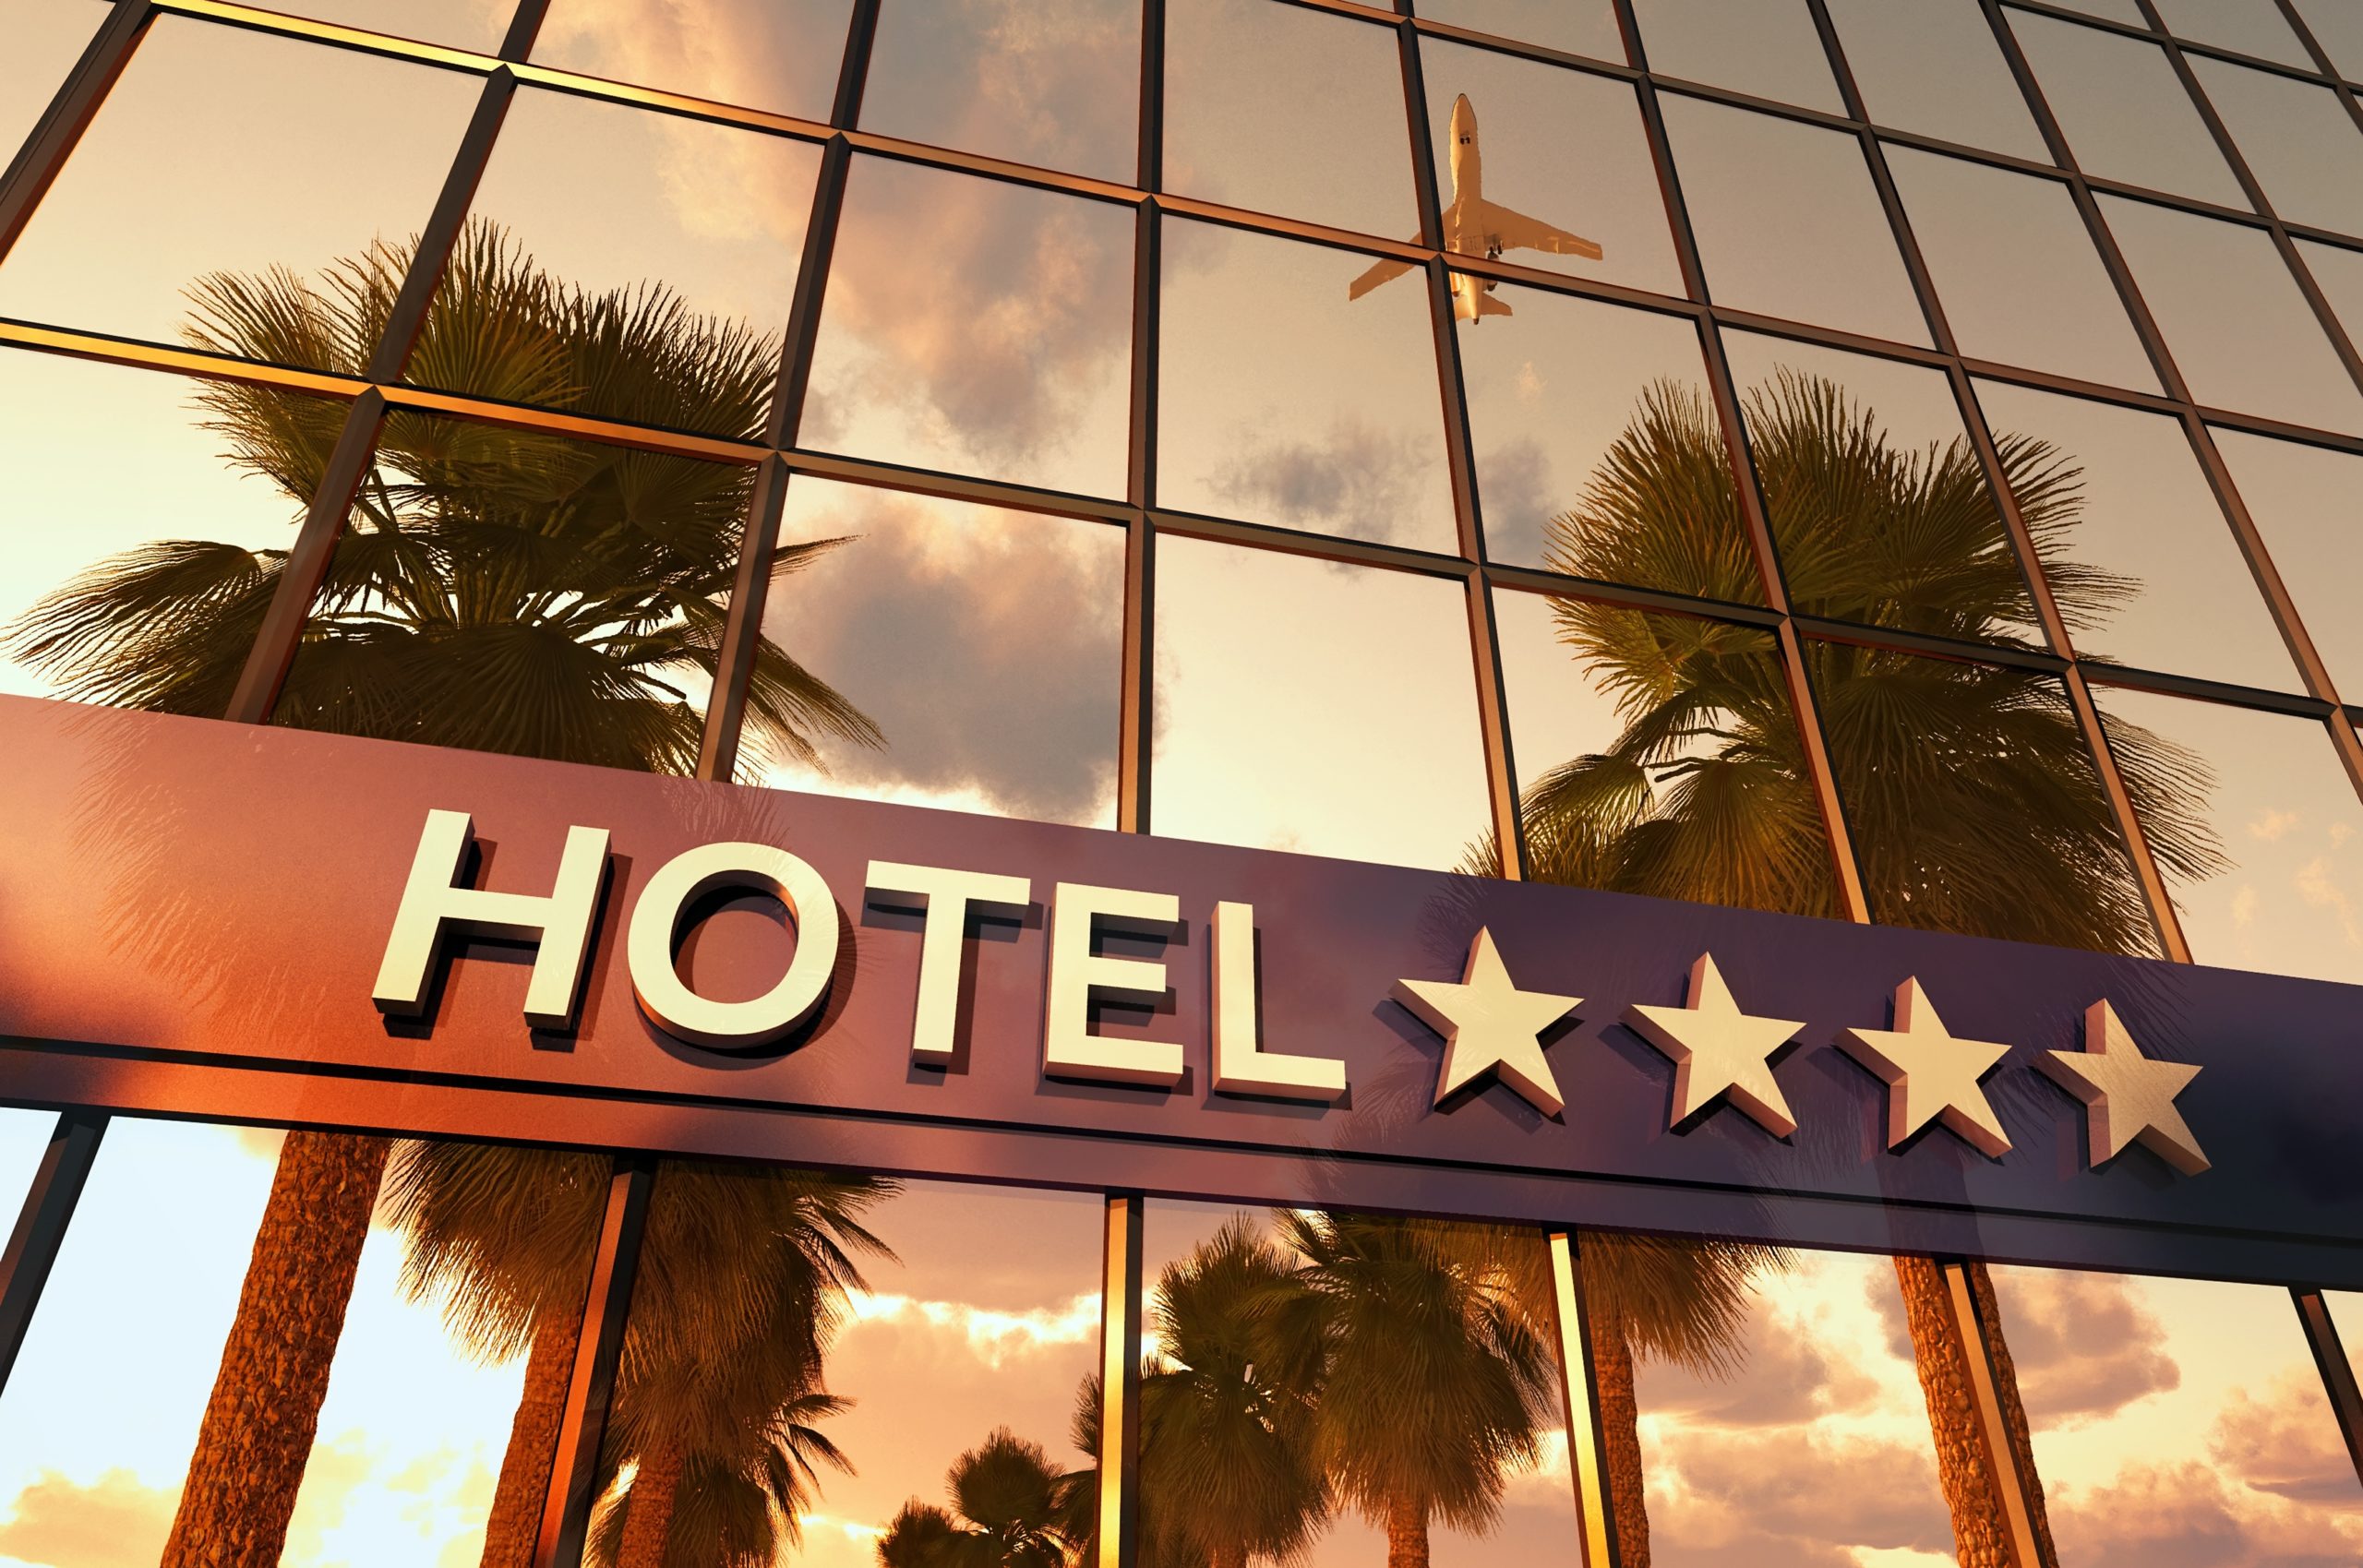 Four-star hotel sign